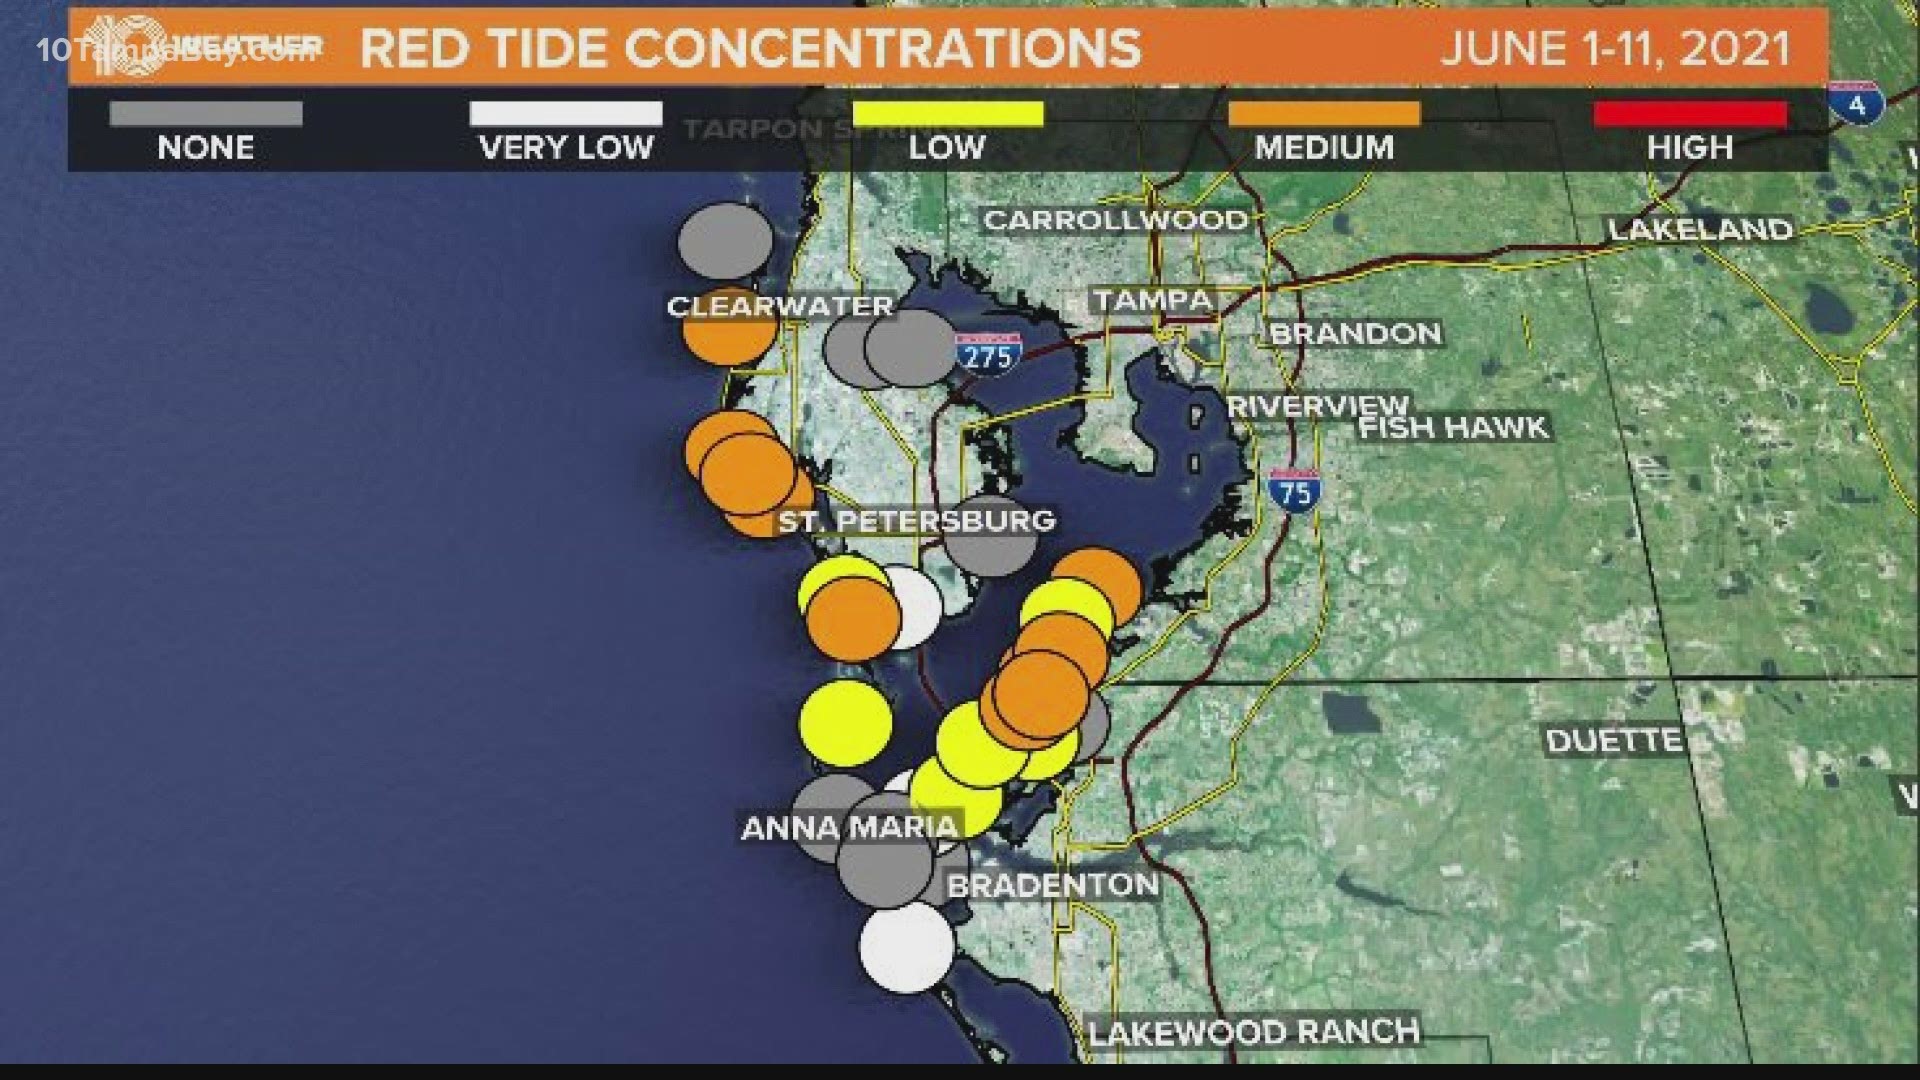 The county's Department of Health says people who are exposed to the red tide organism may experience respiratory symptoms